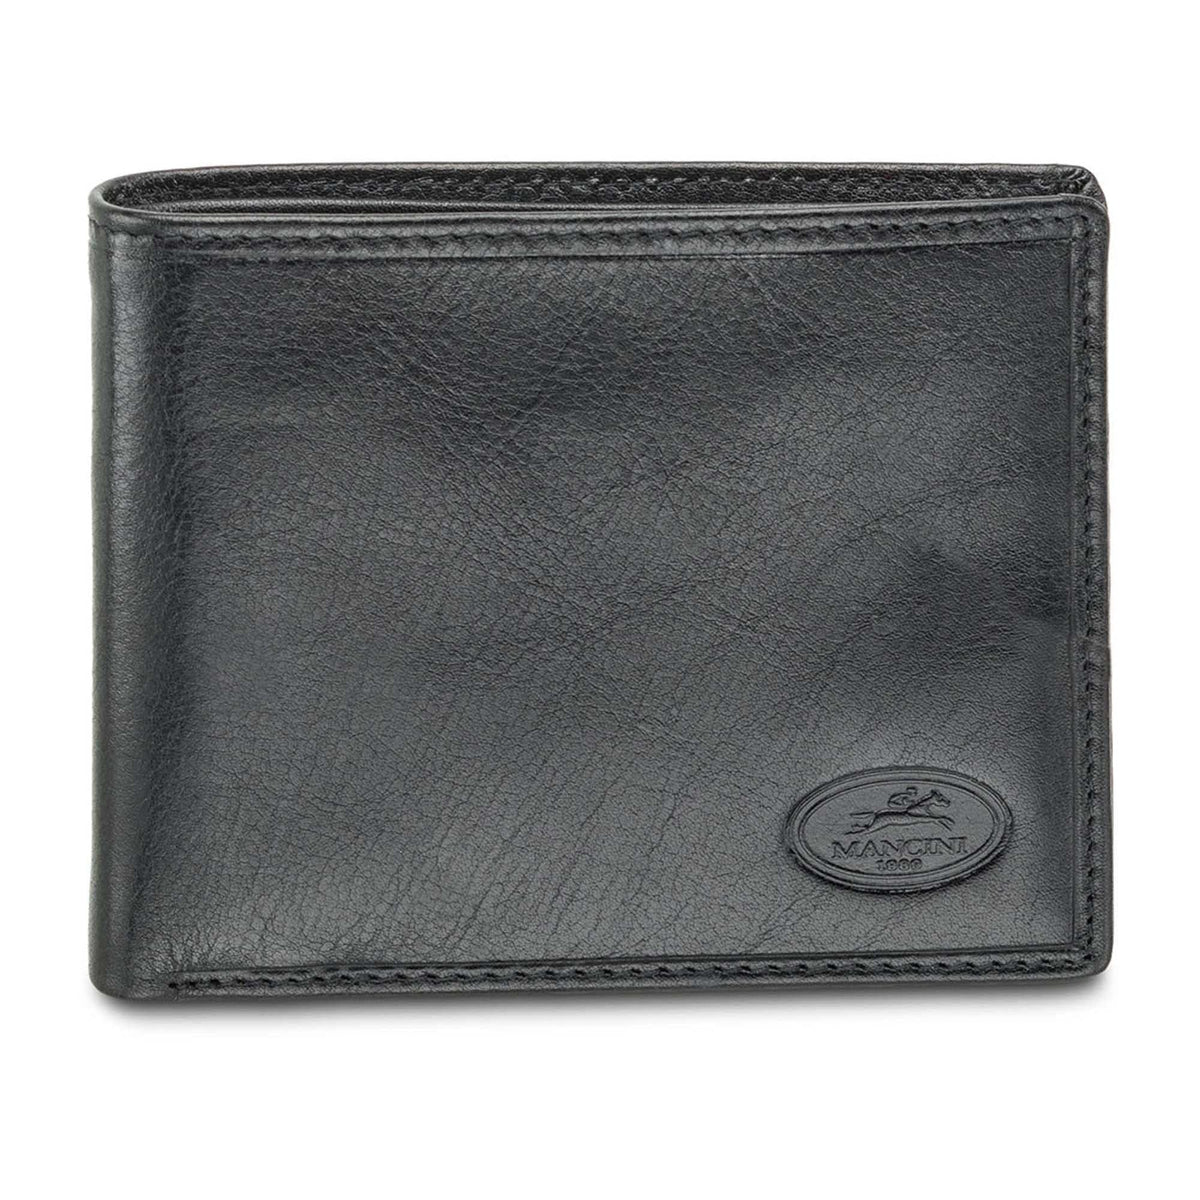 Mancini Equestrian-2 Men’s RFID Secure Center Wing Wallet with Coin Pocket